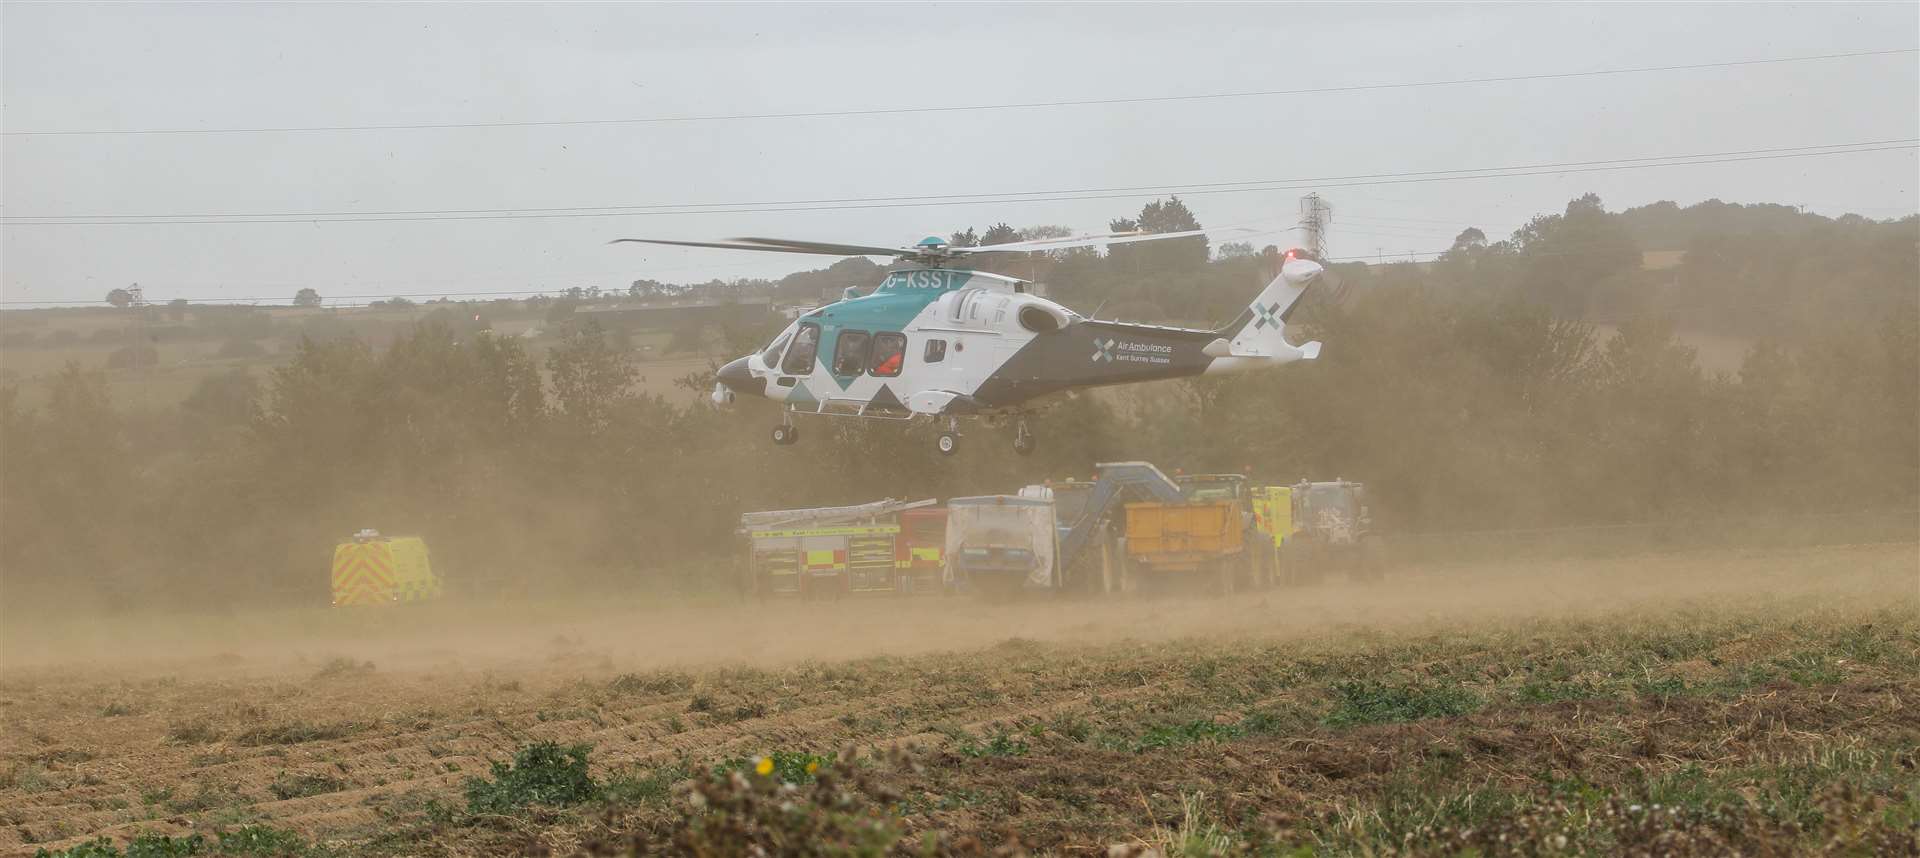 The air ambulance was called. Picture: GETAPIC.CO.UK